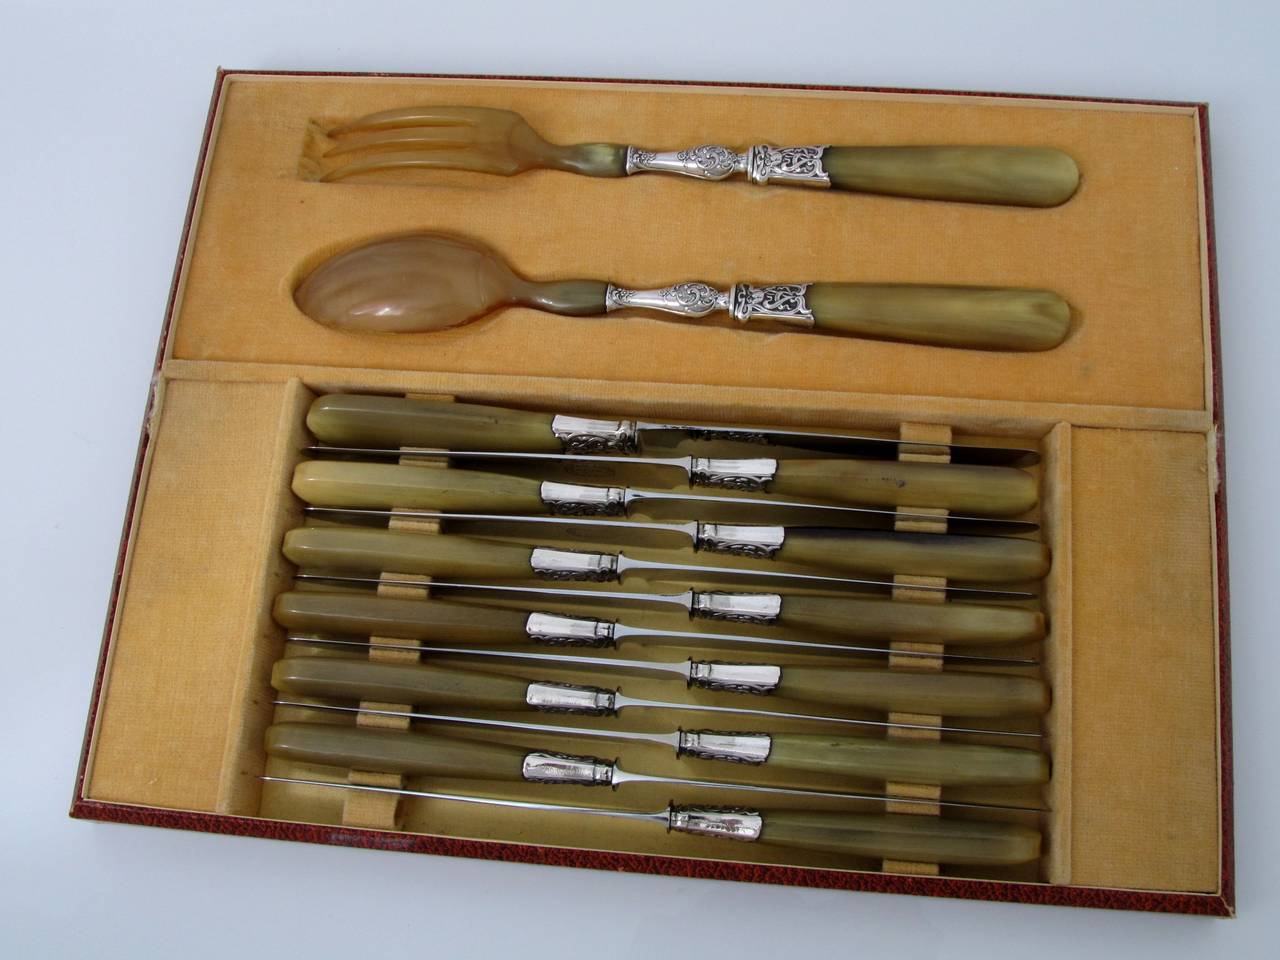 French Horn Sterling Silver Table Knife Set 24 pc with matching Serving Pieces and original box

Swan marks for 800/1000 French Sterling Silver guarantee 

Rare Art Nouveau decoration, one of the most sought after models
by lovers of this